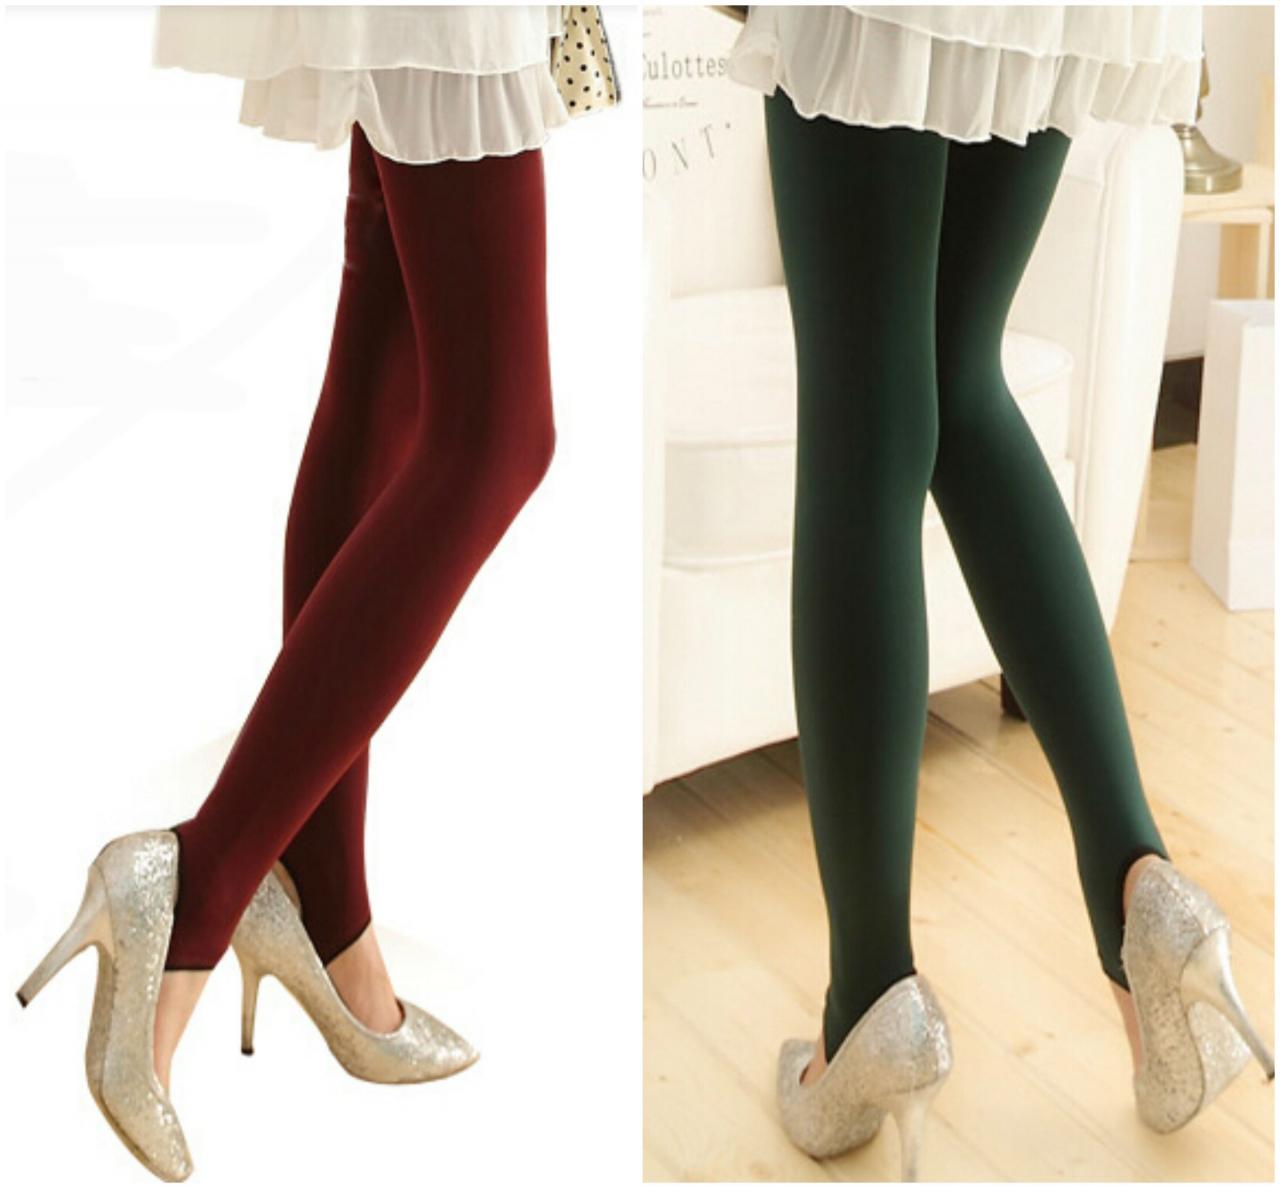 Warm Winter Cotton Leggings In Red And Green